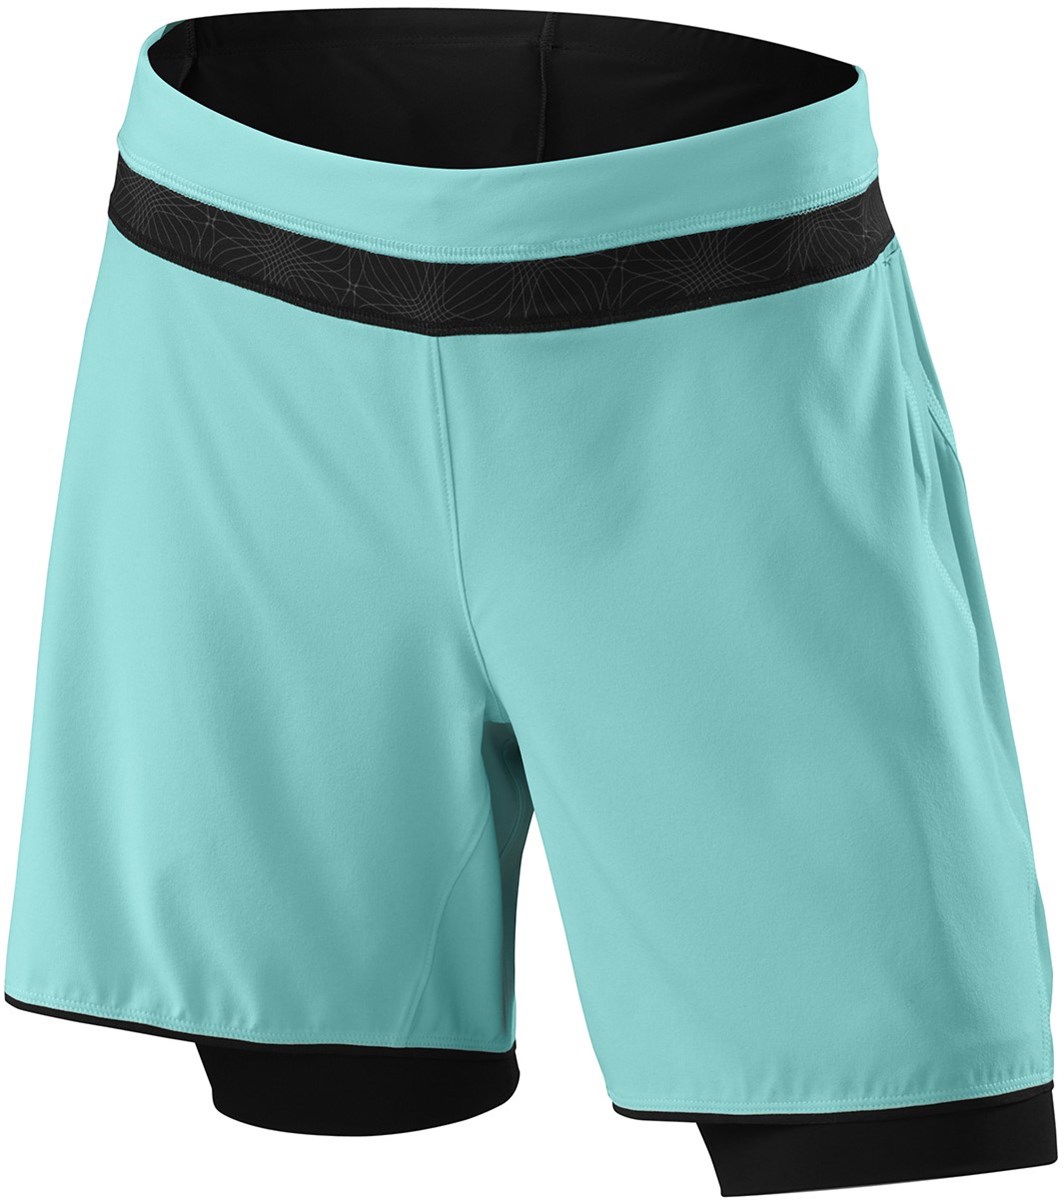 Specialized Shasta Sport Womens Cycling Shorts 2015 product image